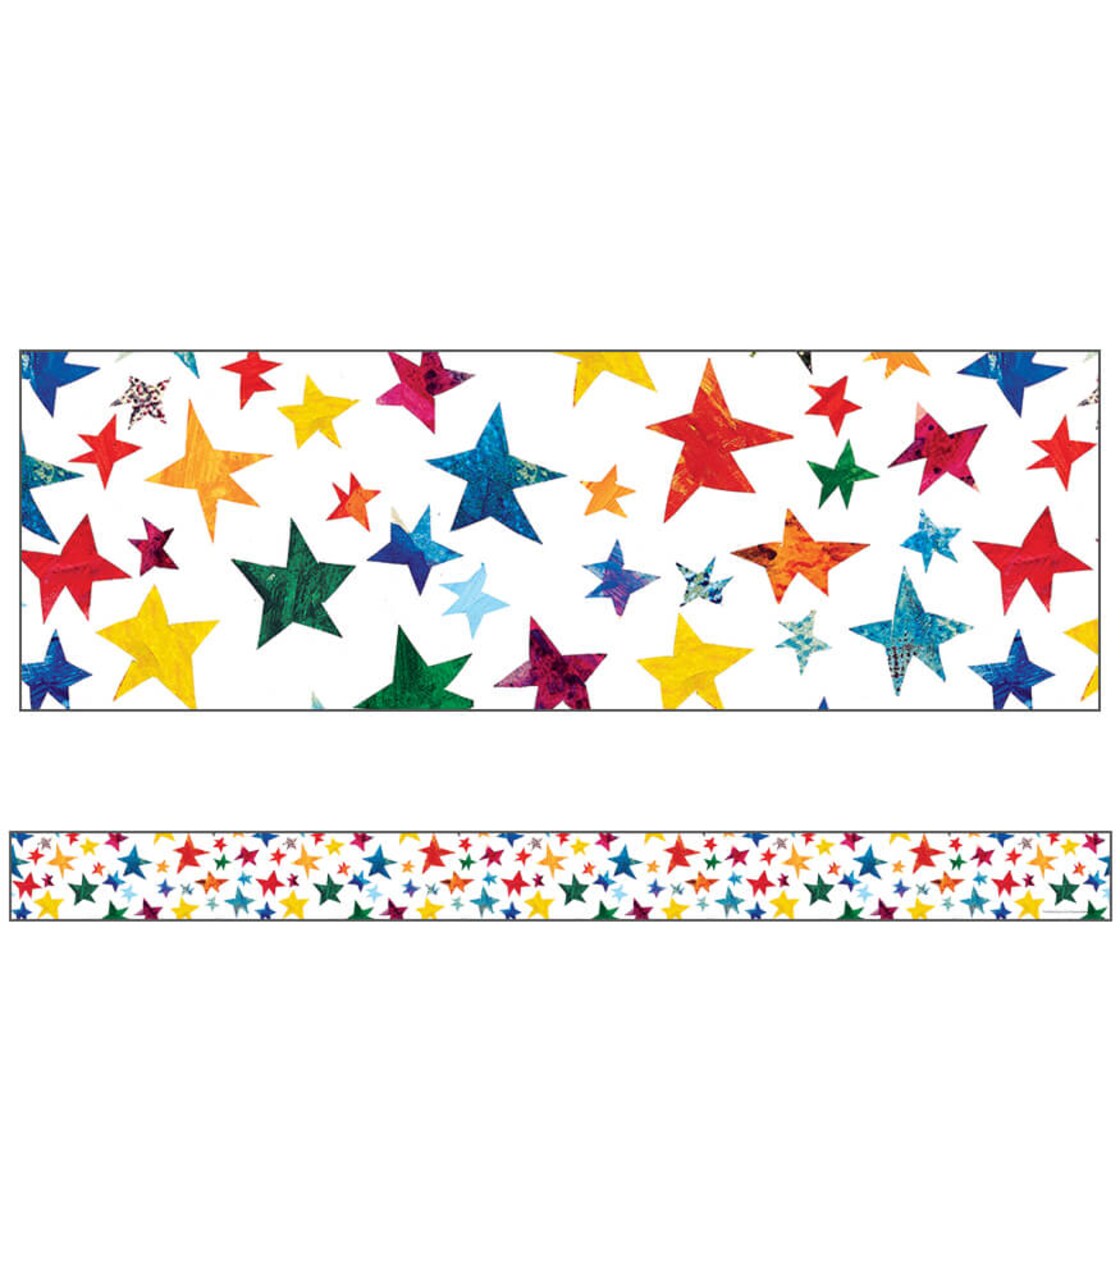 Happily Ever Elementary Bulletin Board Borders, Classroom Borders for Bulletin Board, White Board, Cork Board and Classroom D&#xE9;cor